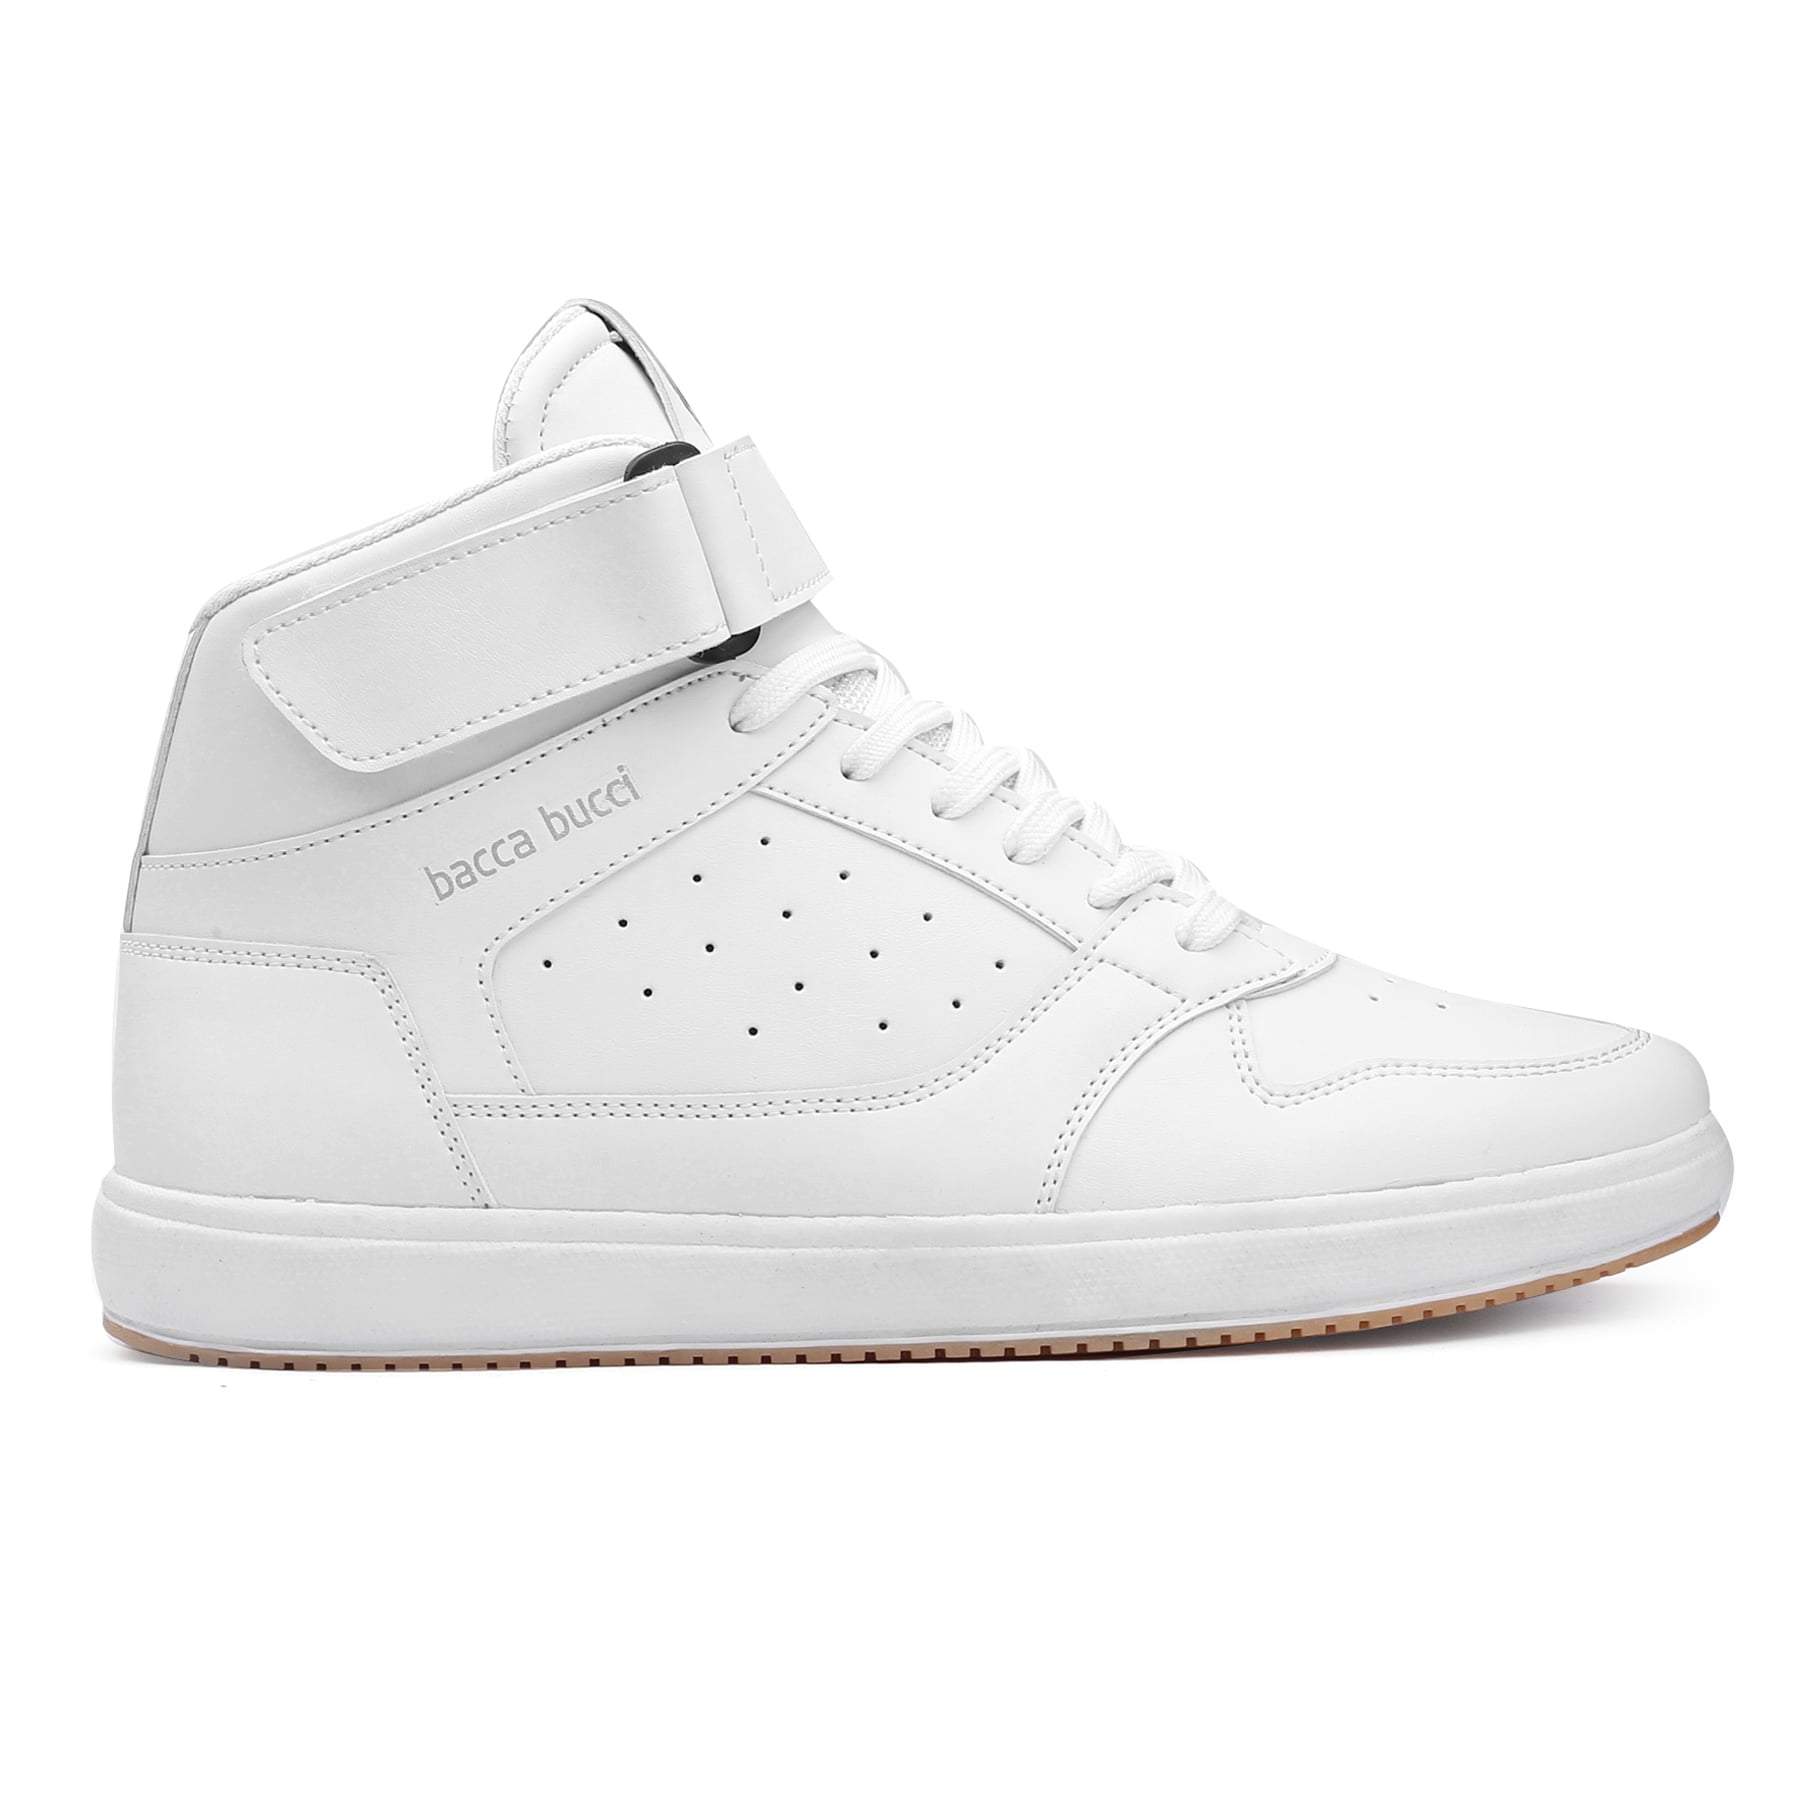 COMPLETE WHITE SHOE SNEAKERS FOR MEN